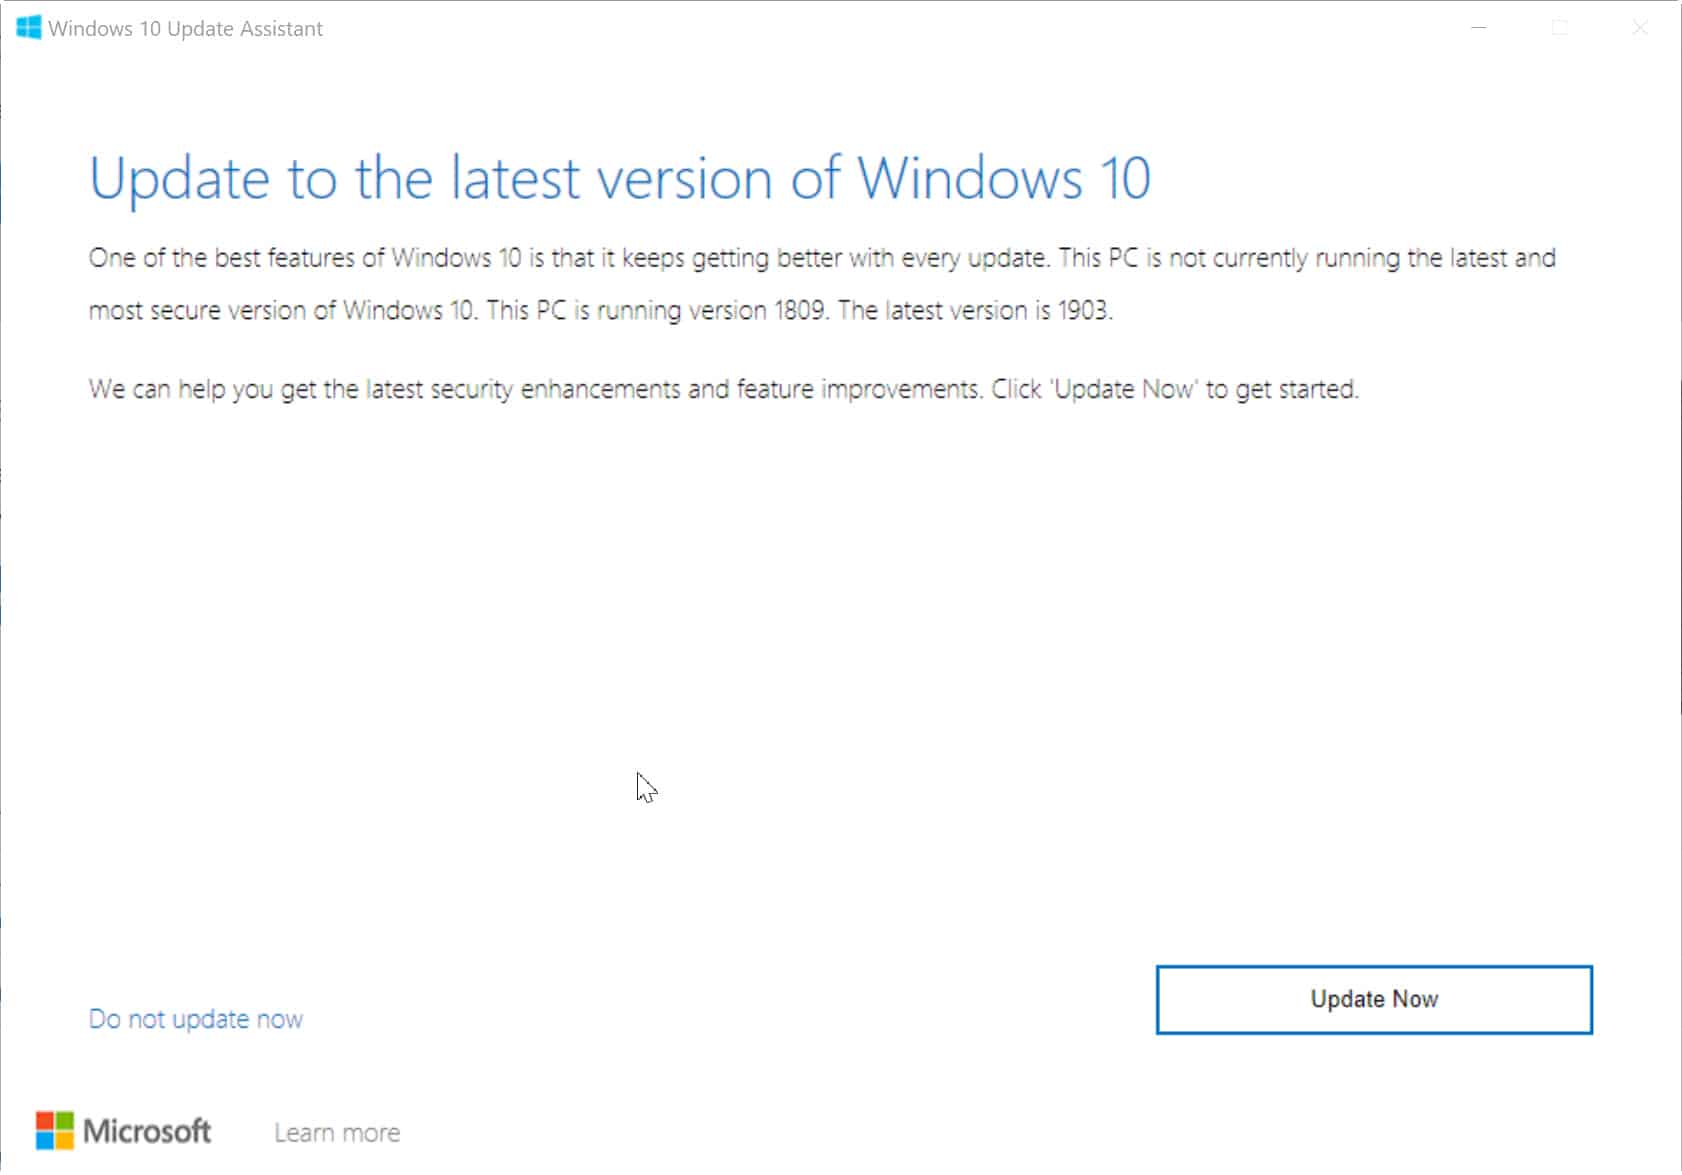 Force Windows 10 to install the May 2019 Update NOW